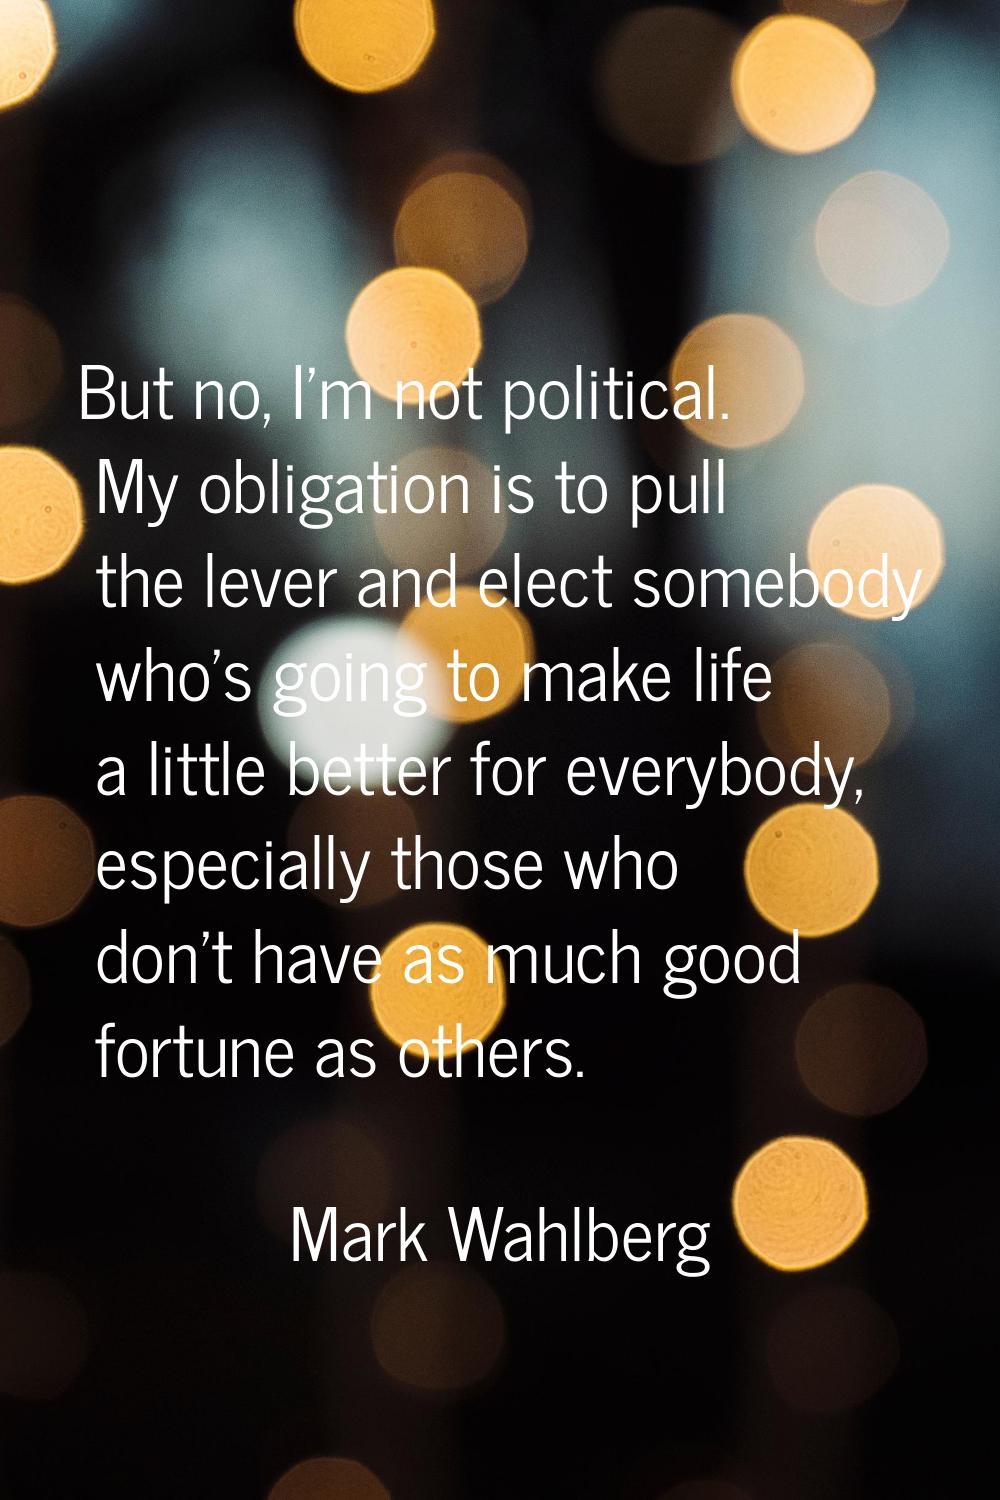 But no, I'm not political. My obligation is to pull the lever and elect somebody who's going to mak